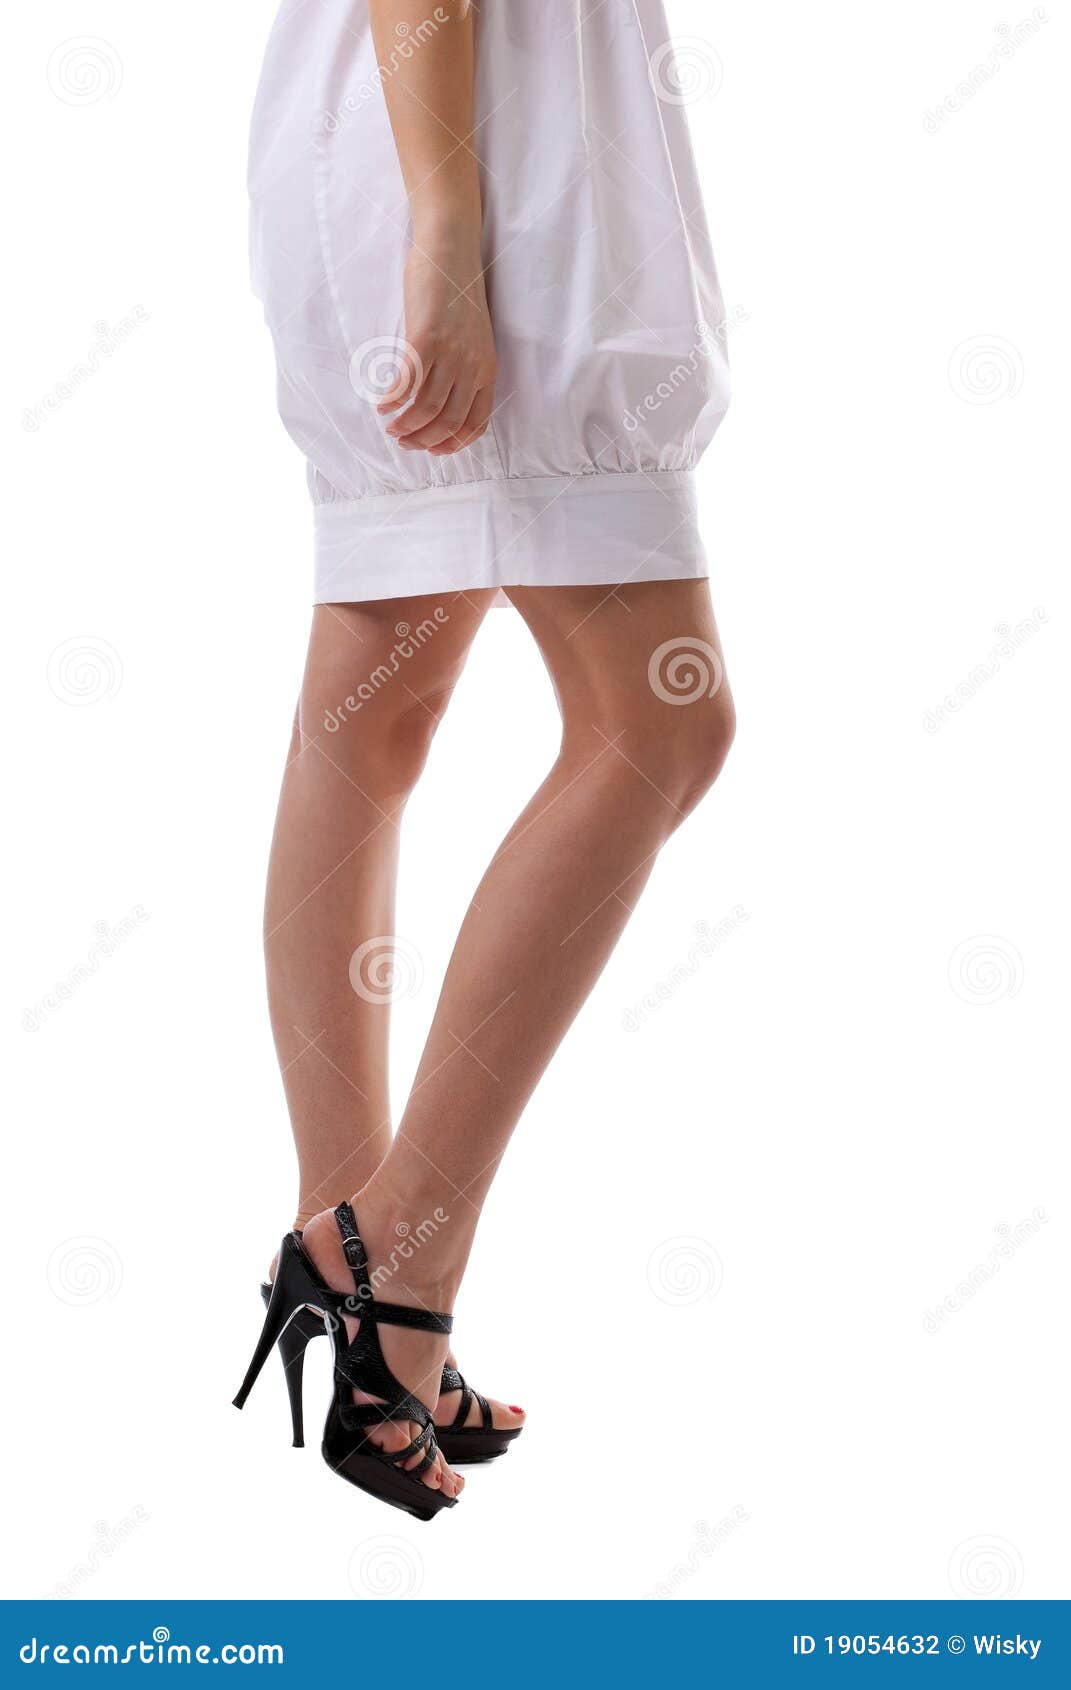 Beauty Woman Legs in White Cloth Stock Photo - Image of footwear, stand ...